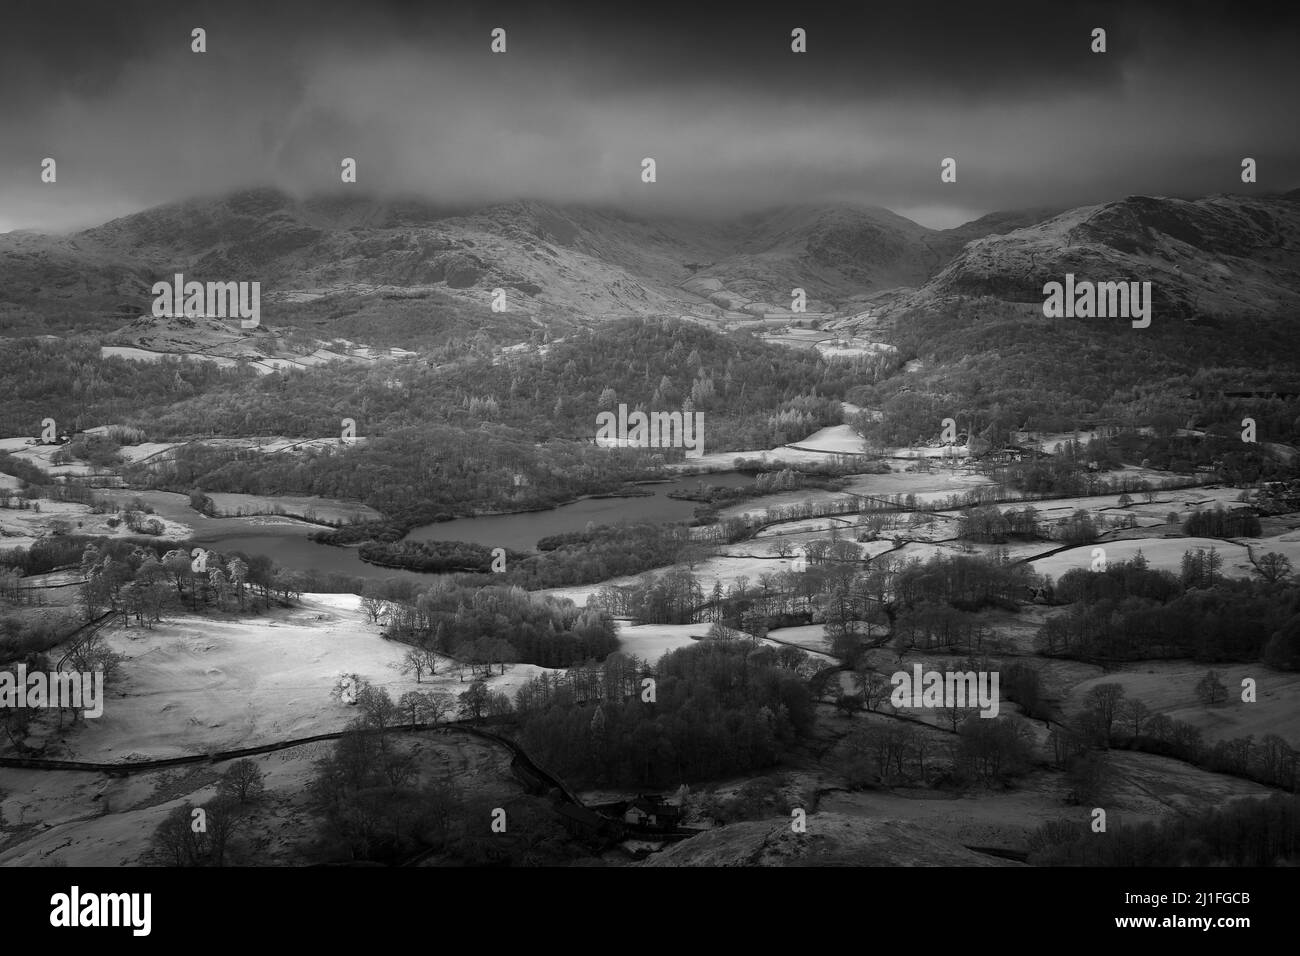 A black and white image of Rydal Water from Loughrigg Fell in the Lake District National Park, Cumbria, England. Stock Photo